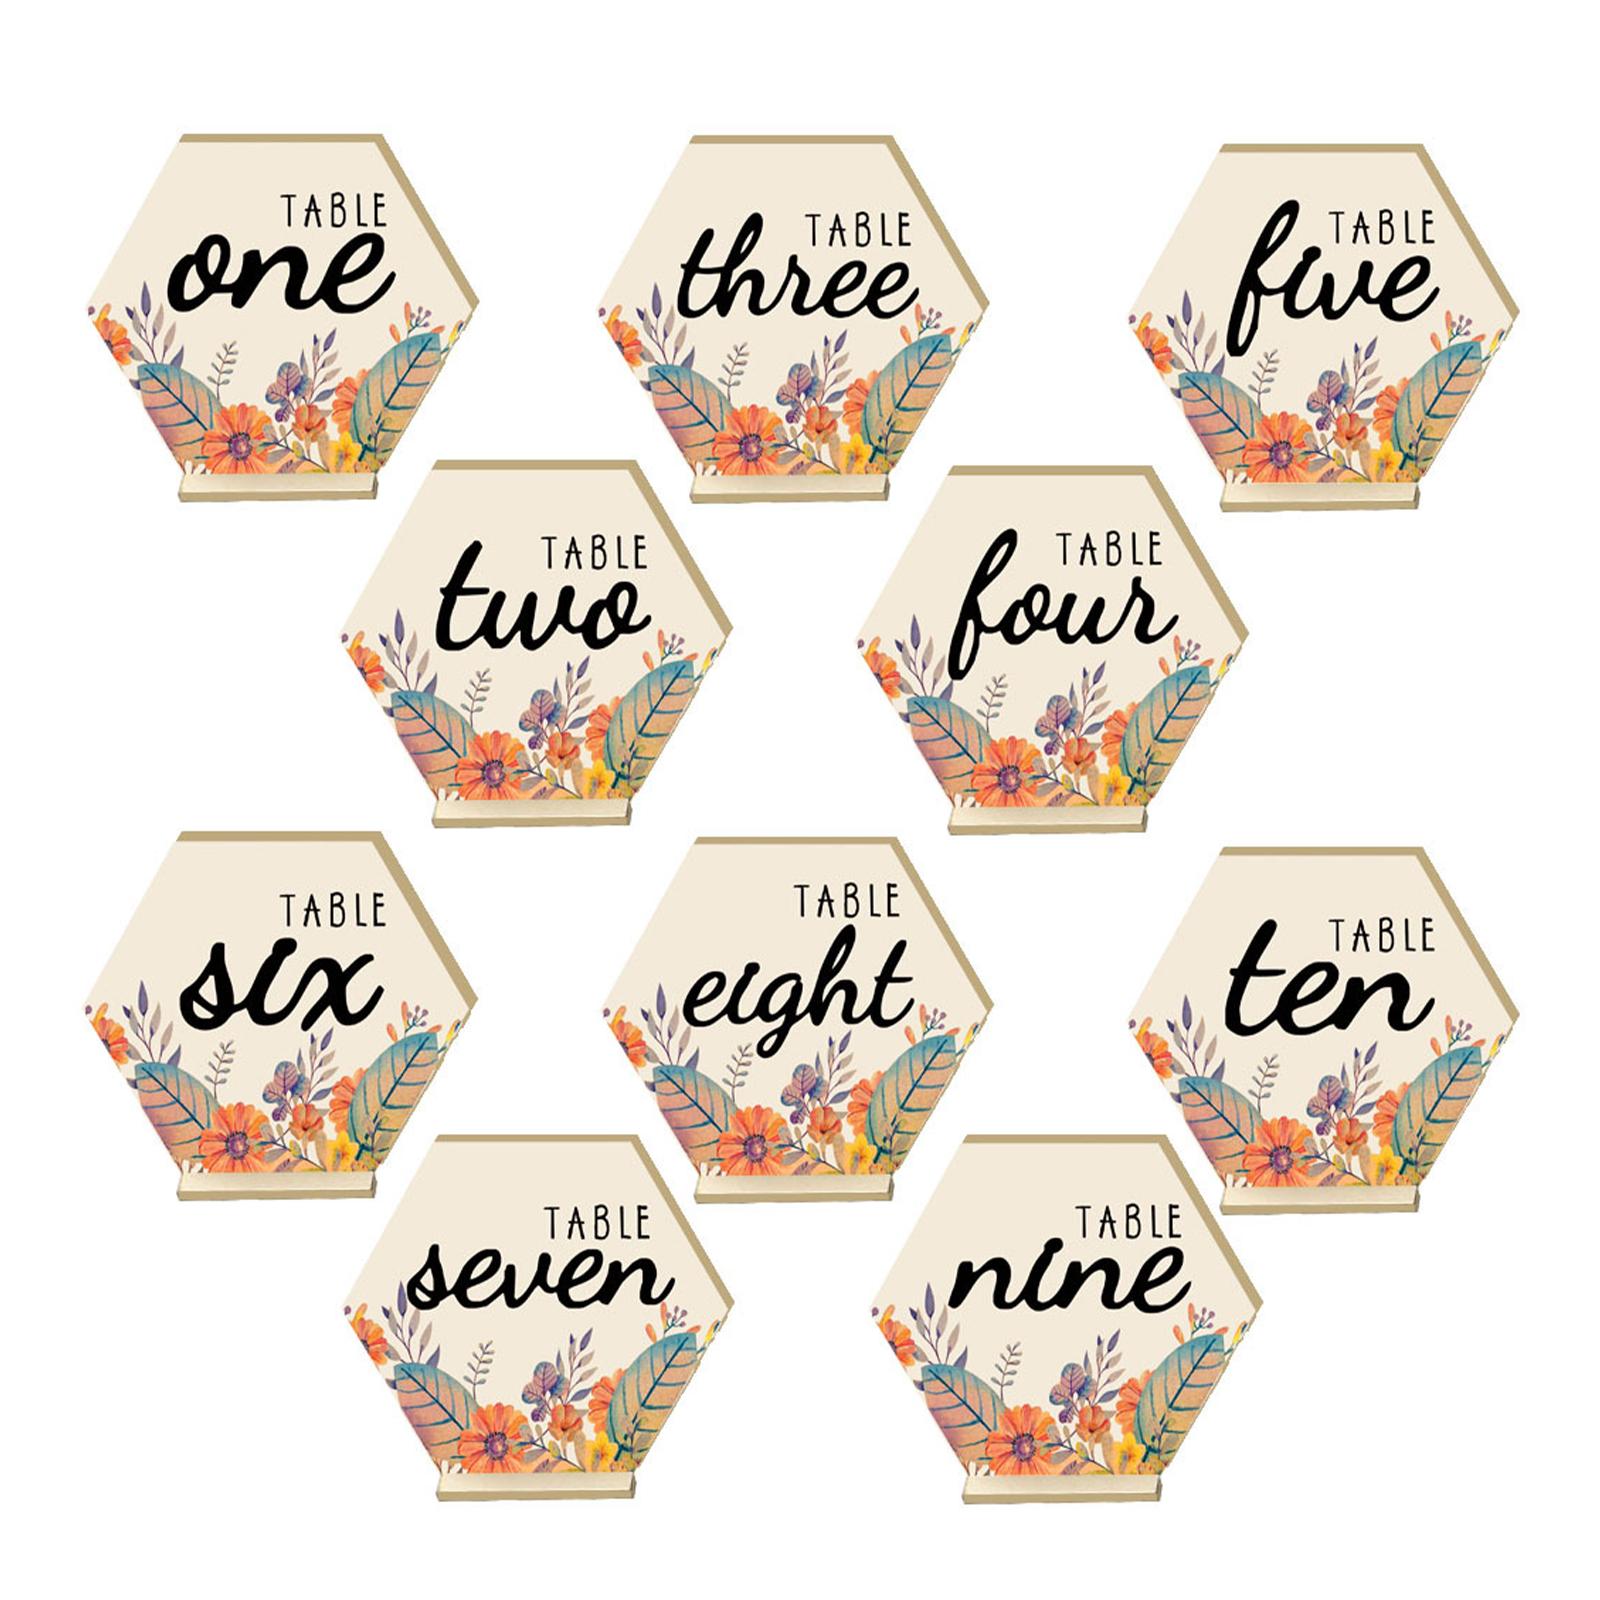 Wood Table Numbers with Stands Hexagonal Geometric for Catering Centerpiece